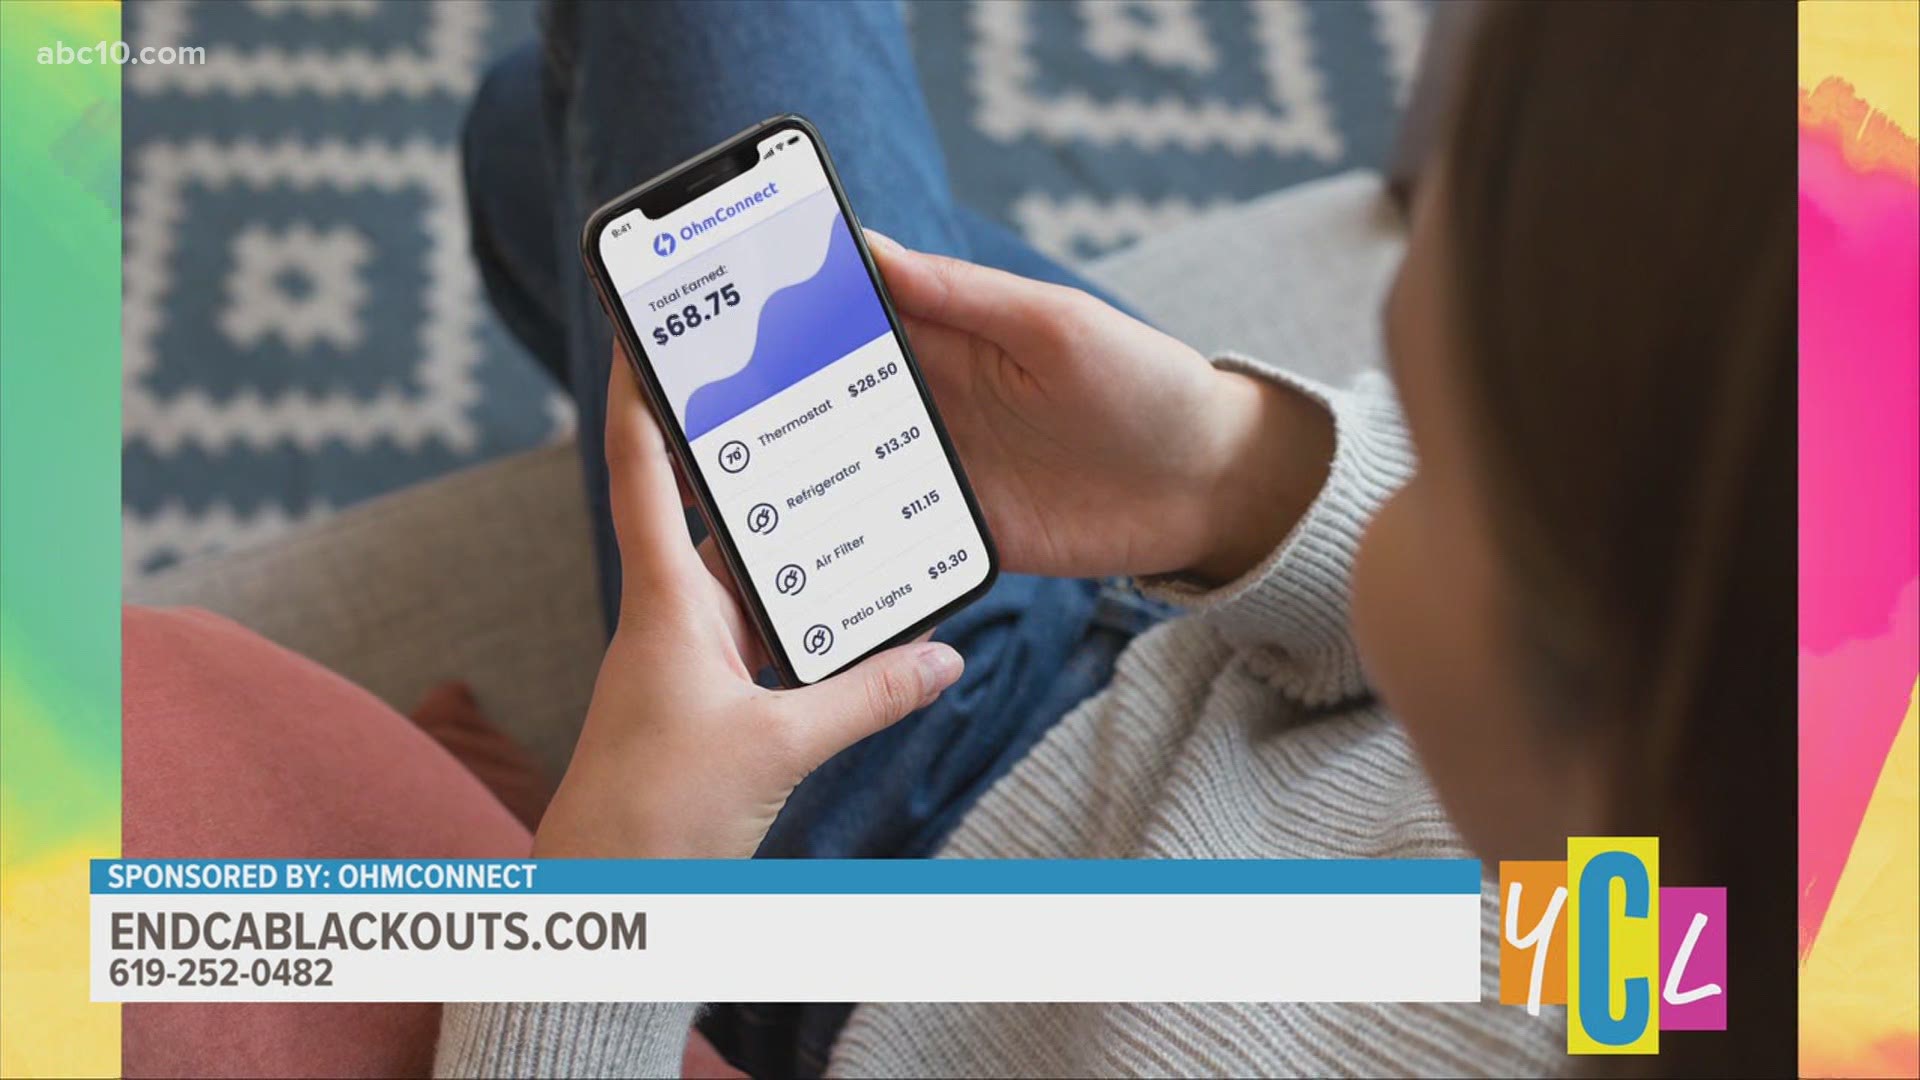 OhmConnect joins us to talk about their EndCABlackouts campaign to help prevent rolling blackouts in California this Summer. This segment paid for by OhmConnect.